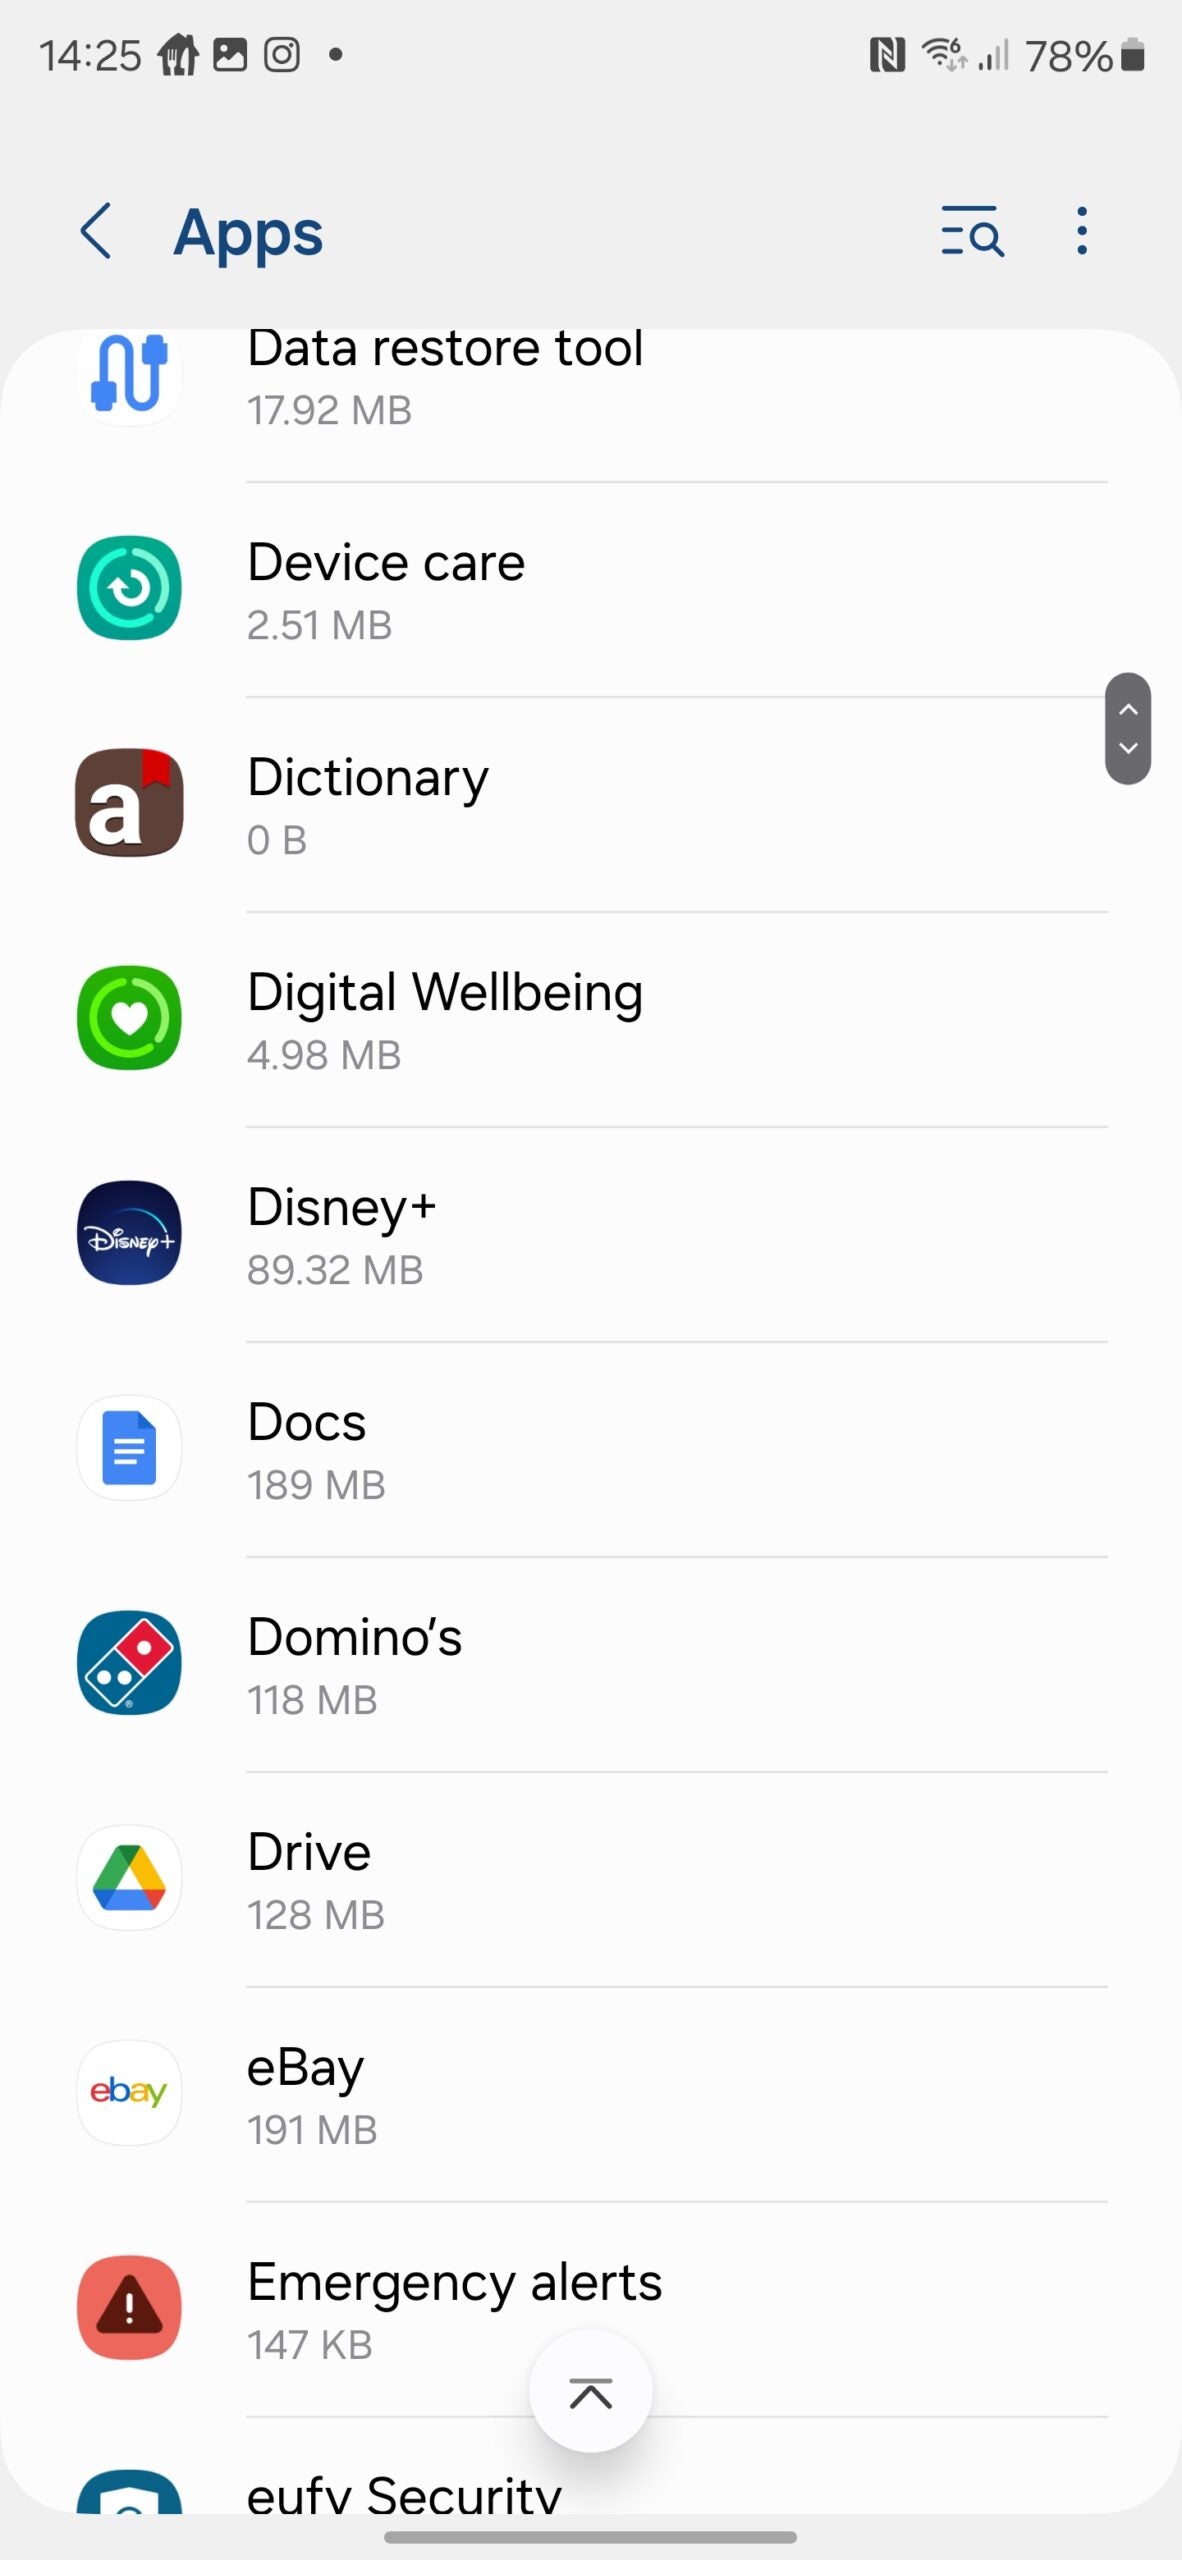 Main Apps menu on Android